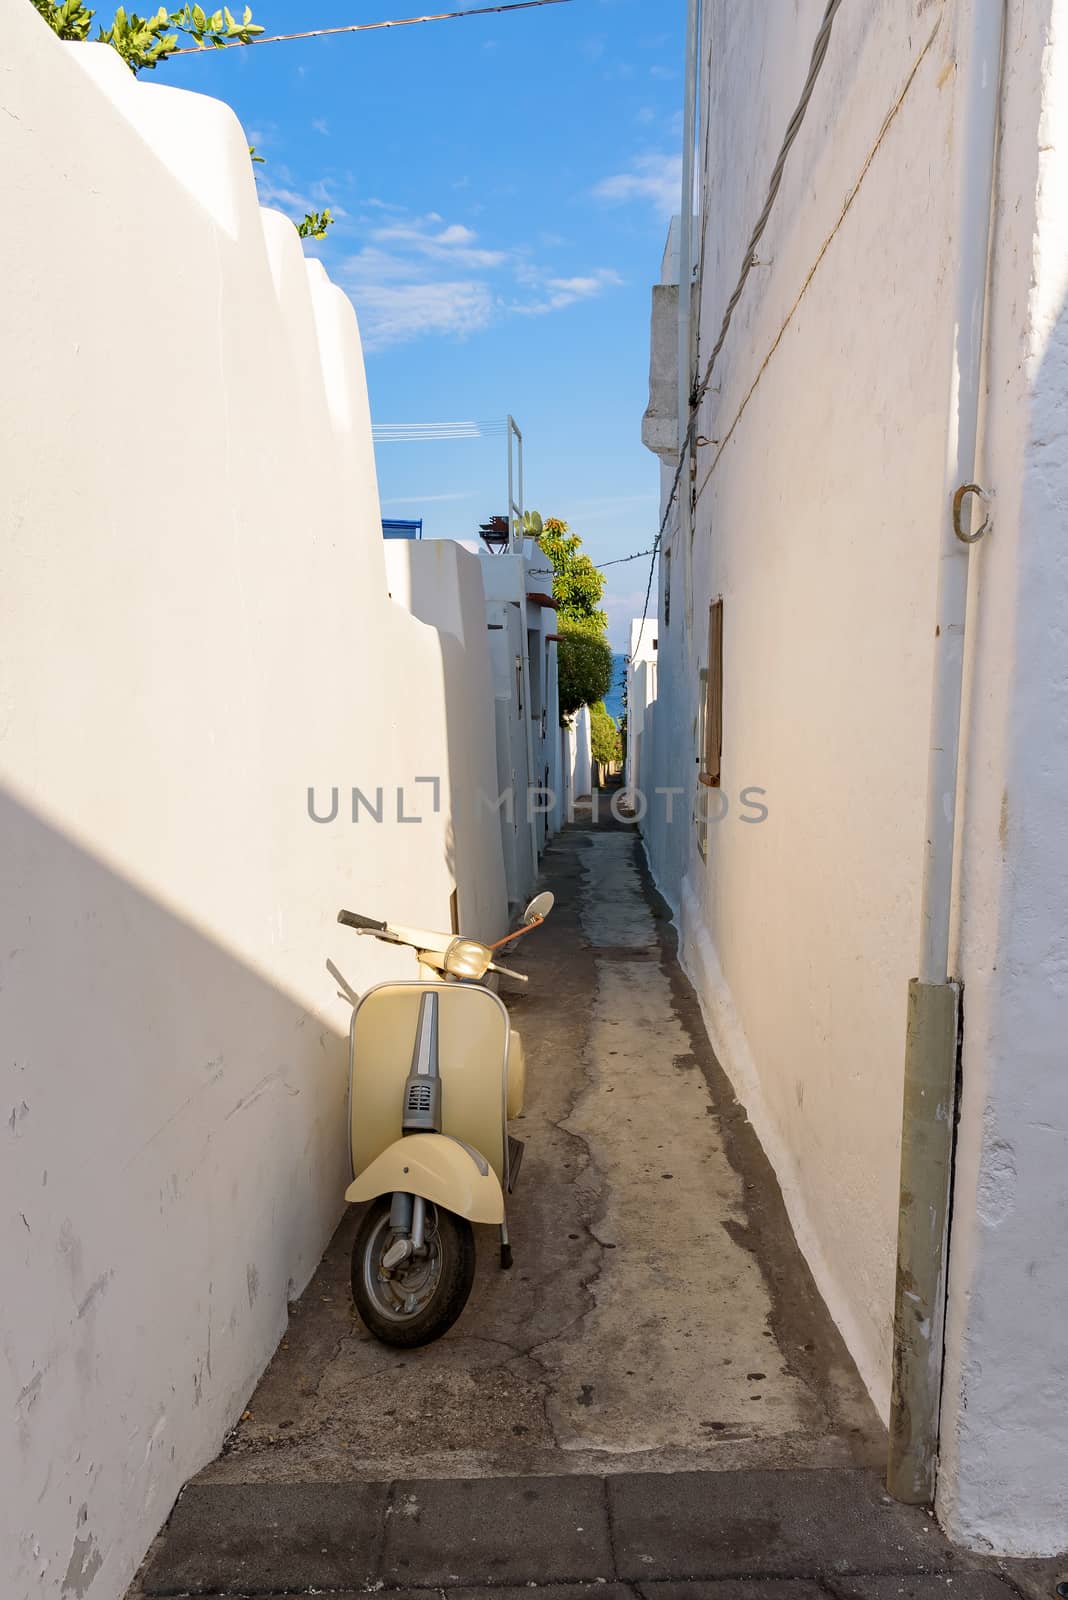 Scooter in narrow street of Stromboli village by mkos83